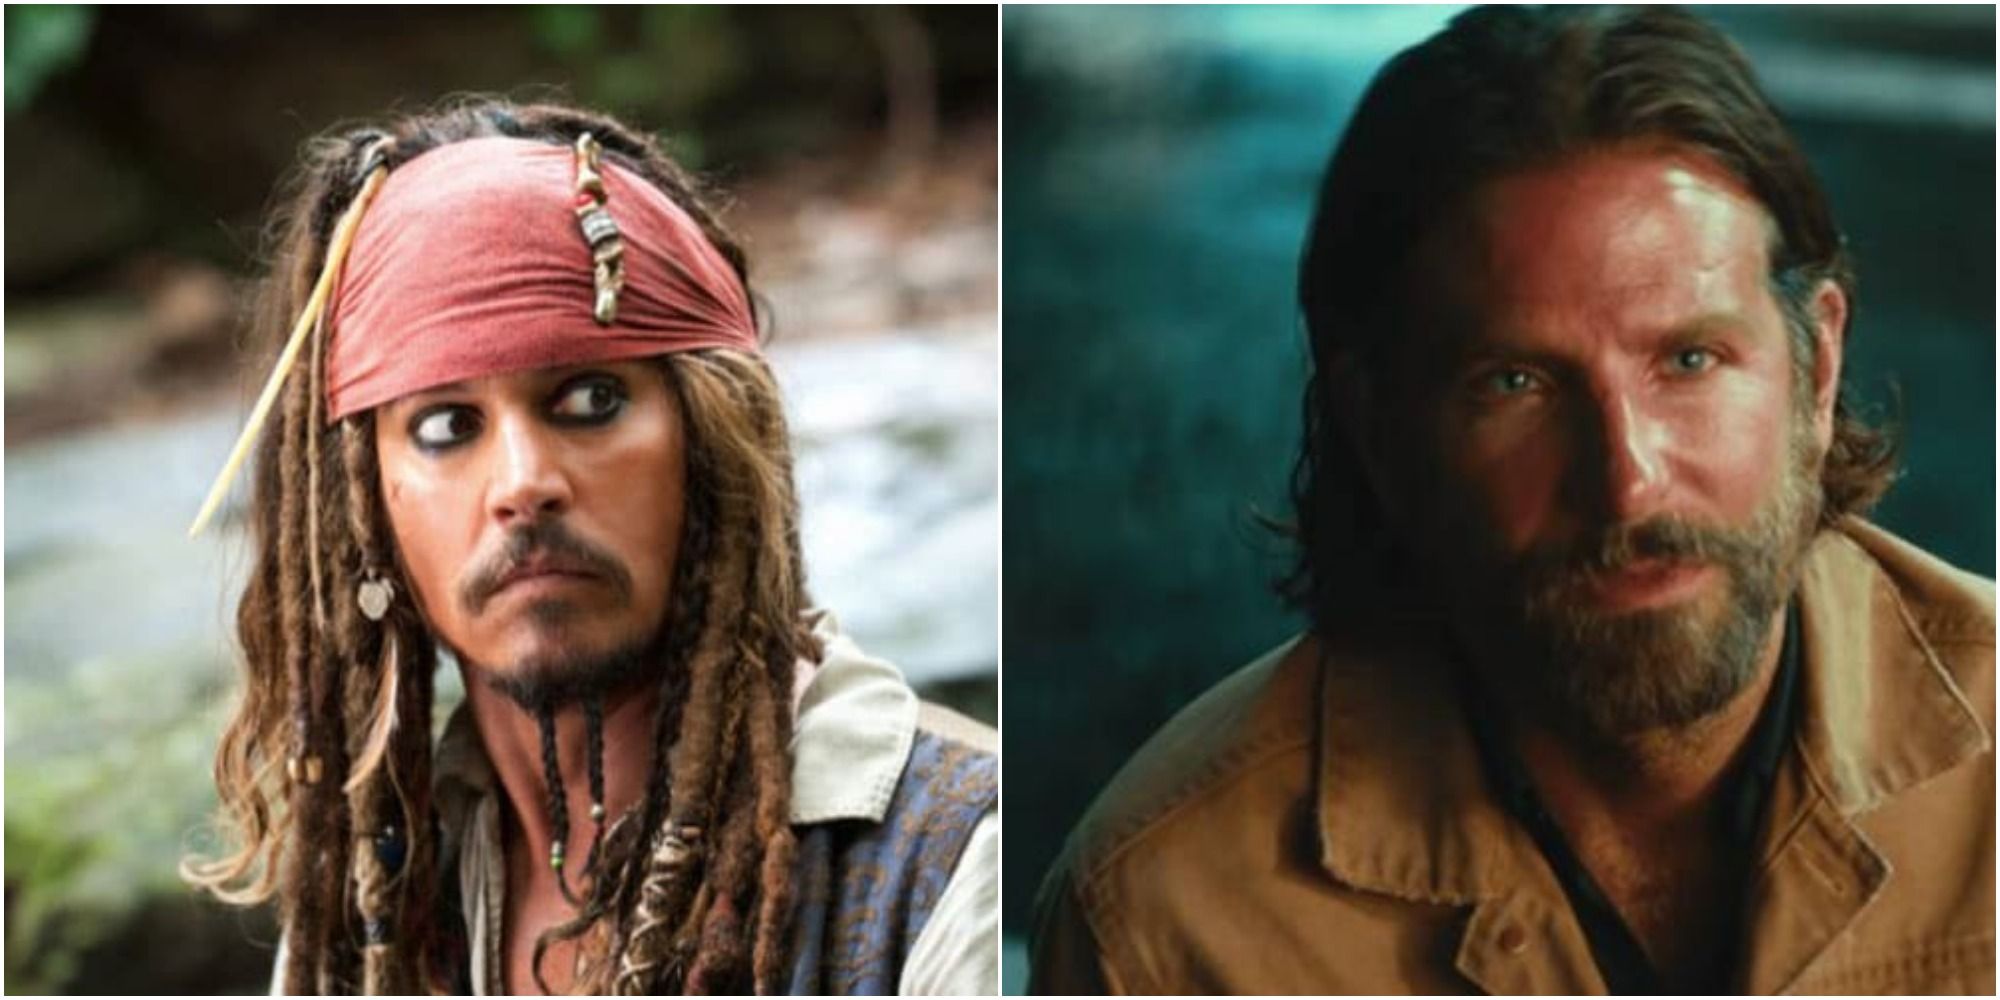 Bradley Cooper and Johnny Depp, two character who have never won Oscar